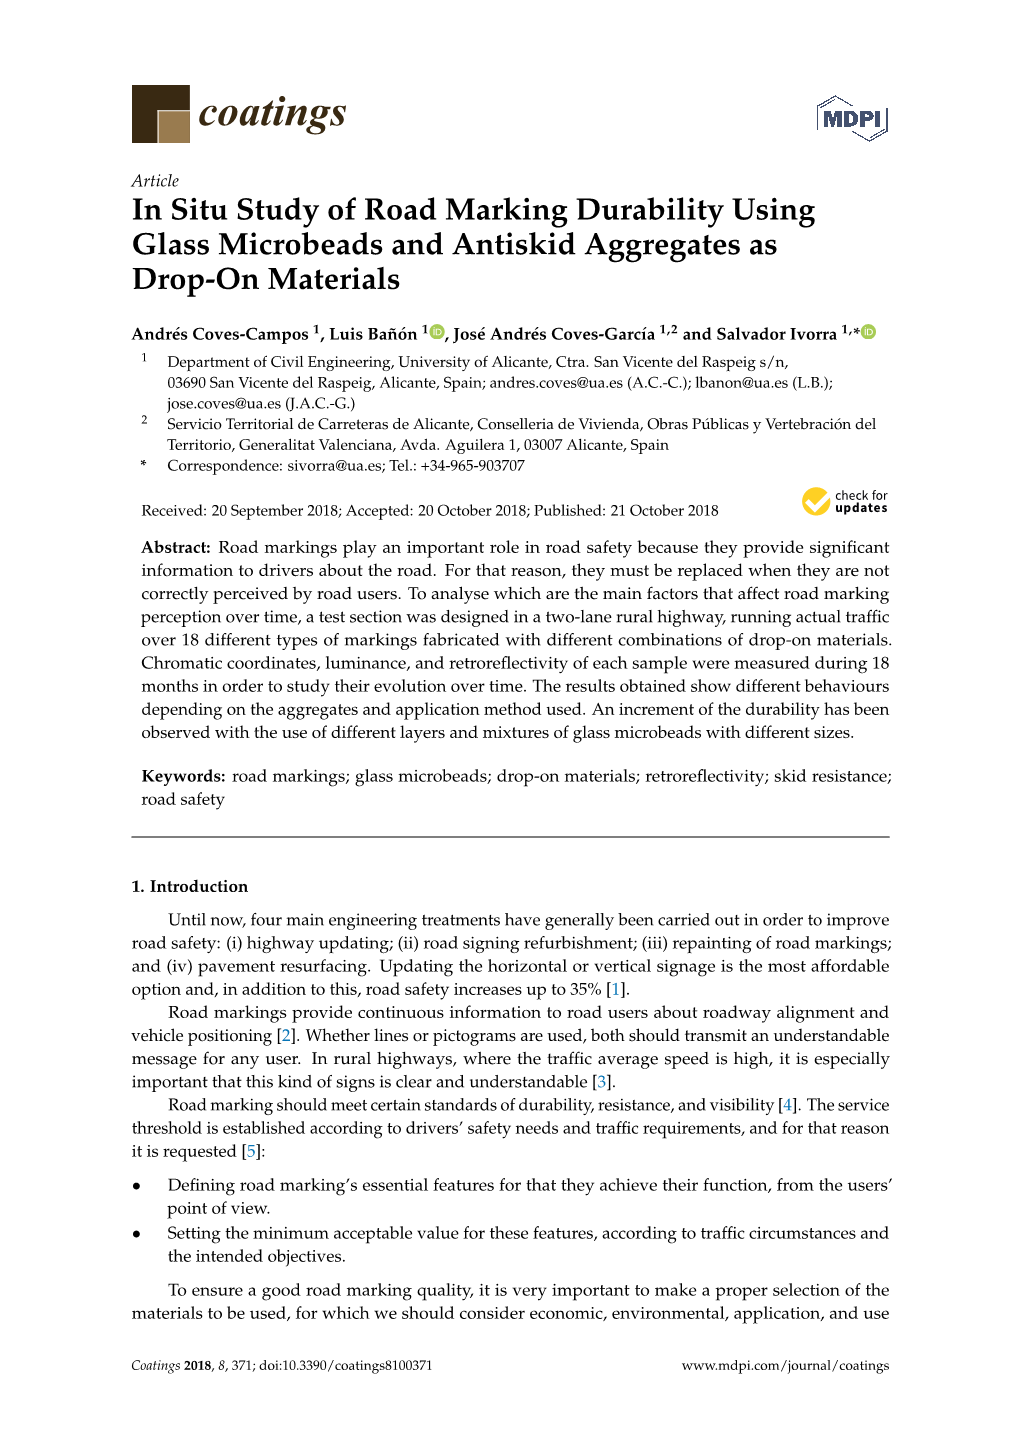 In Situ Study of Road Marking Durability Using Glass Microbeads and Antiskid Aggregates As Drop-On Materials